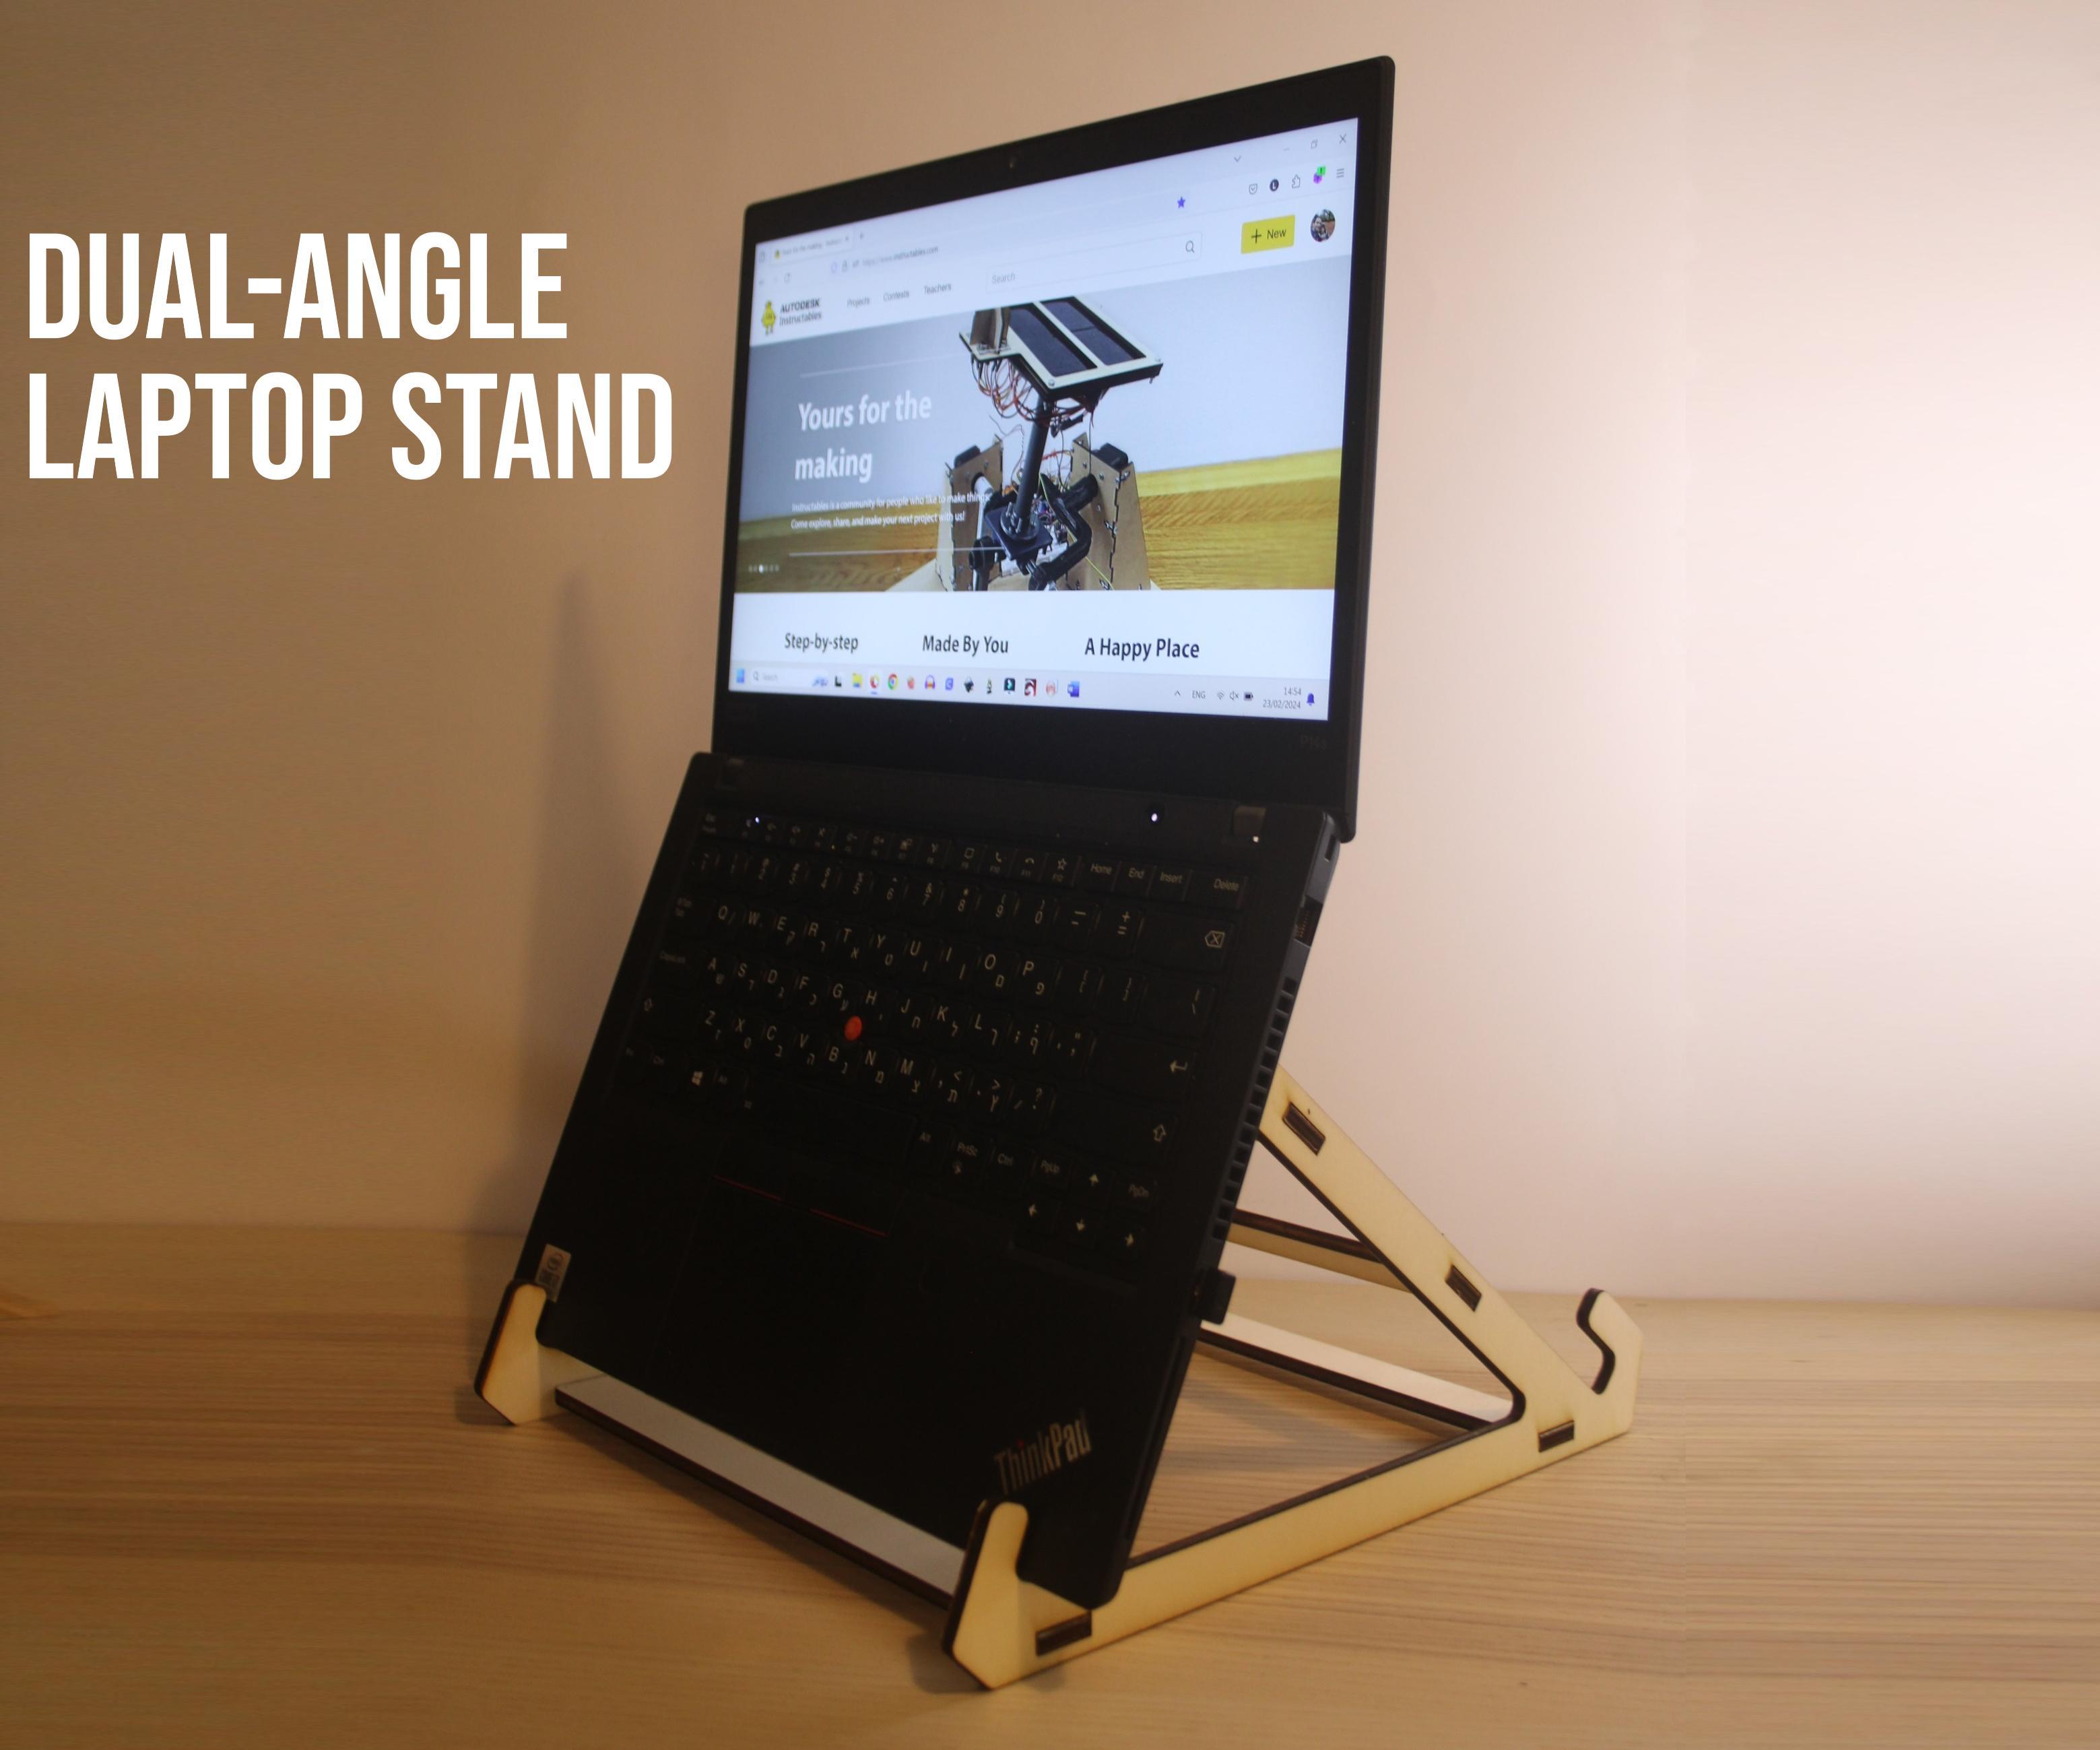 Dual-Angle Laptop Stand